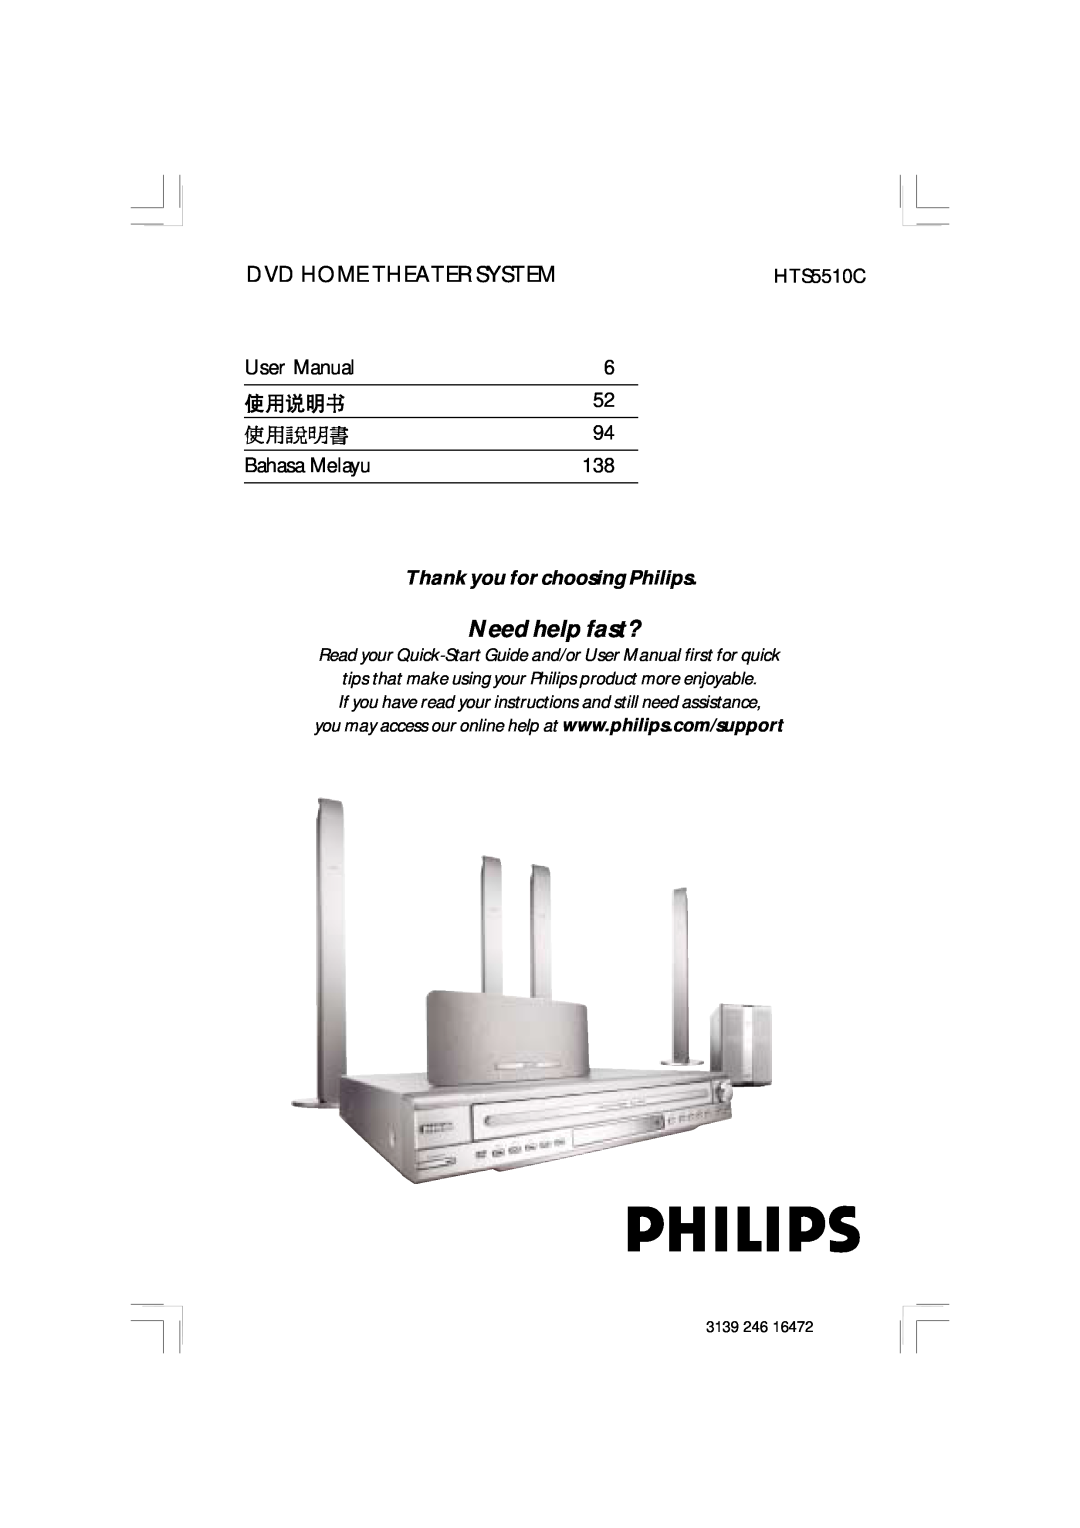 Philips HTS5510C quick start Bahasa Melayu, Need help fast?, Dvd Home Theater System, Thank you for choosing Philips 